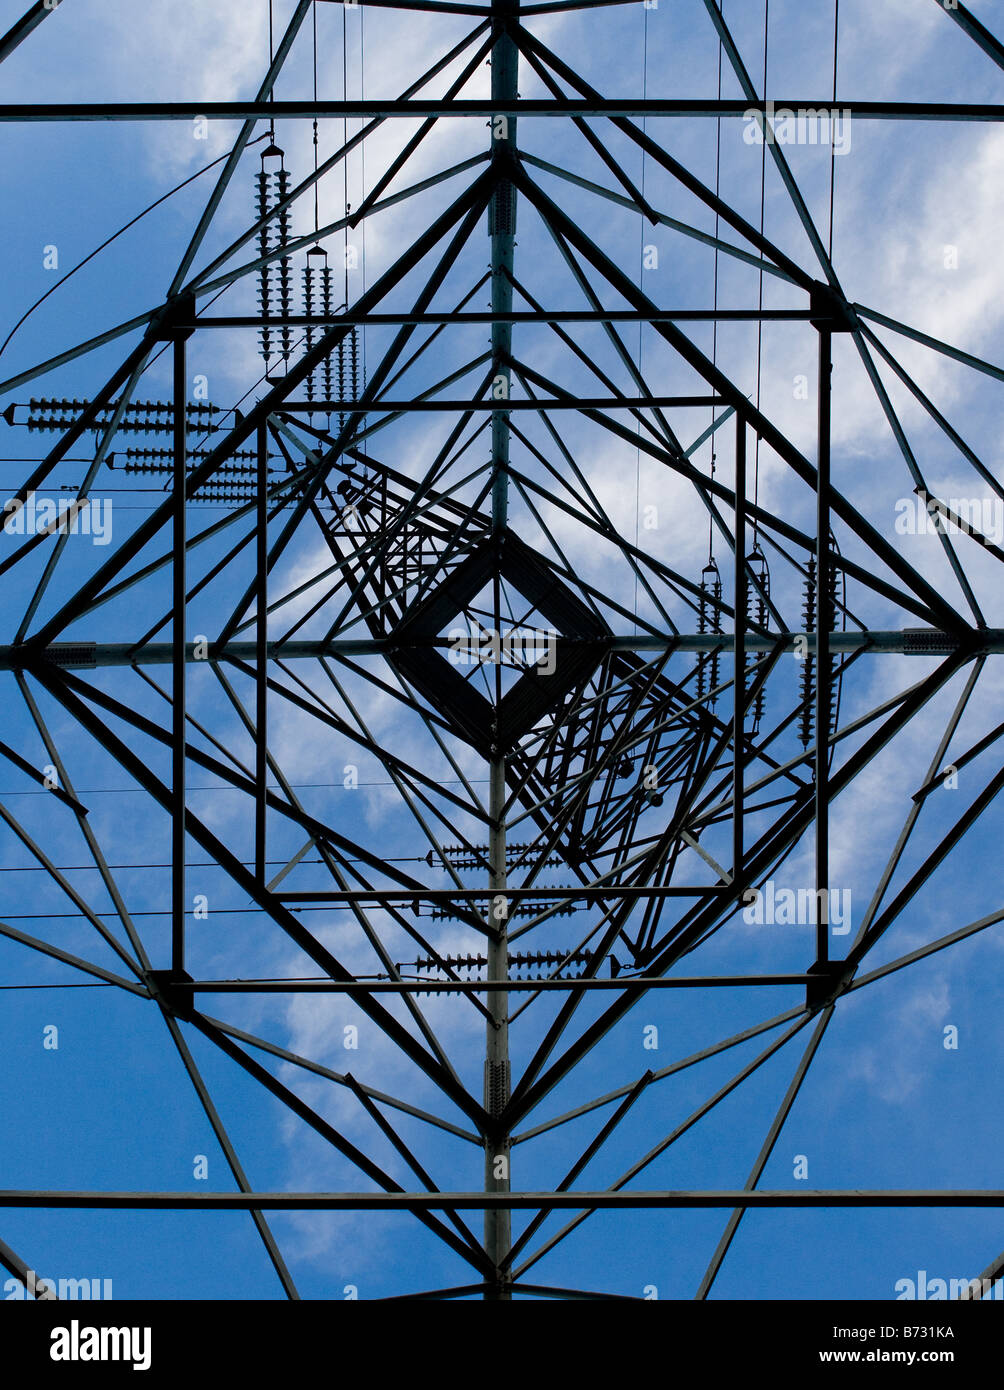 Power line tower as seen from below Stock Photo